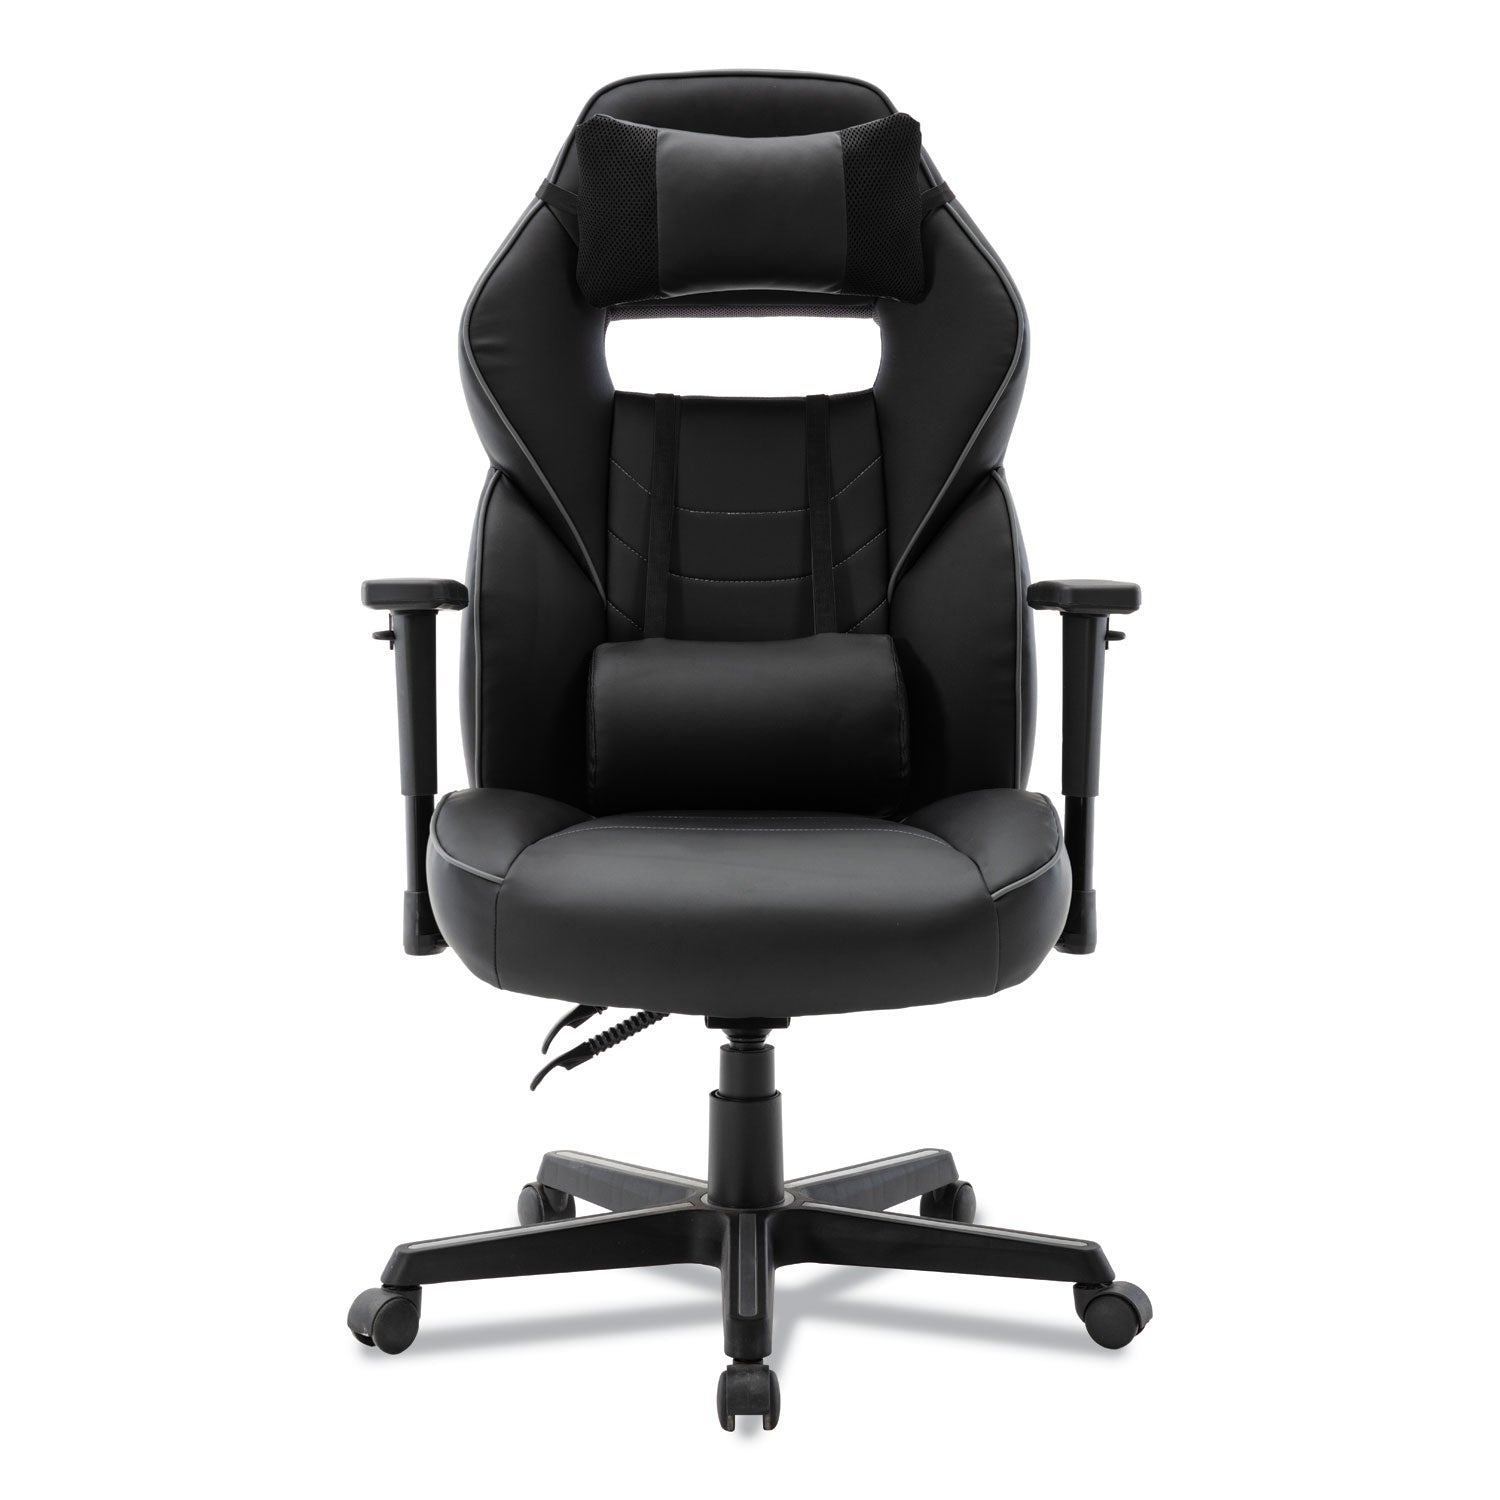 racing-style-ergonomic-gaming-chair-supports-275-lb-1591-to-198-seat-height-black-gray-trim-seat-back-black-gray-base_alegm4146 - 2